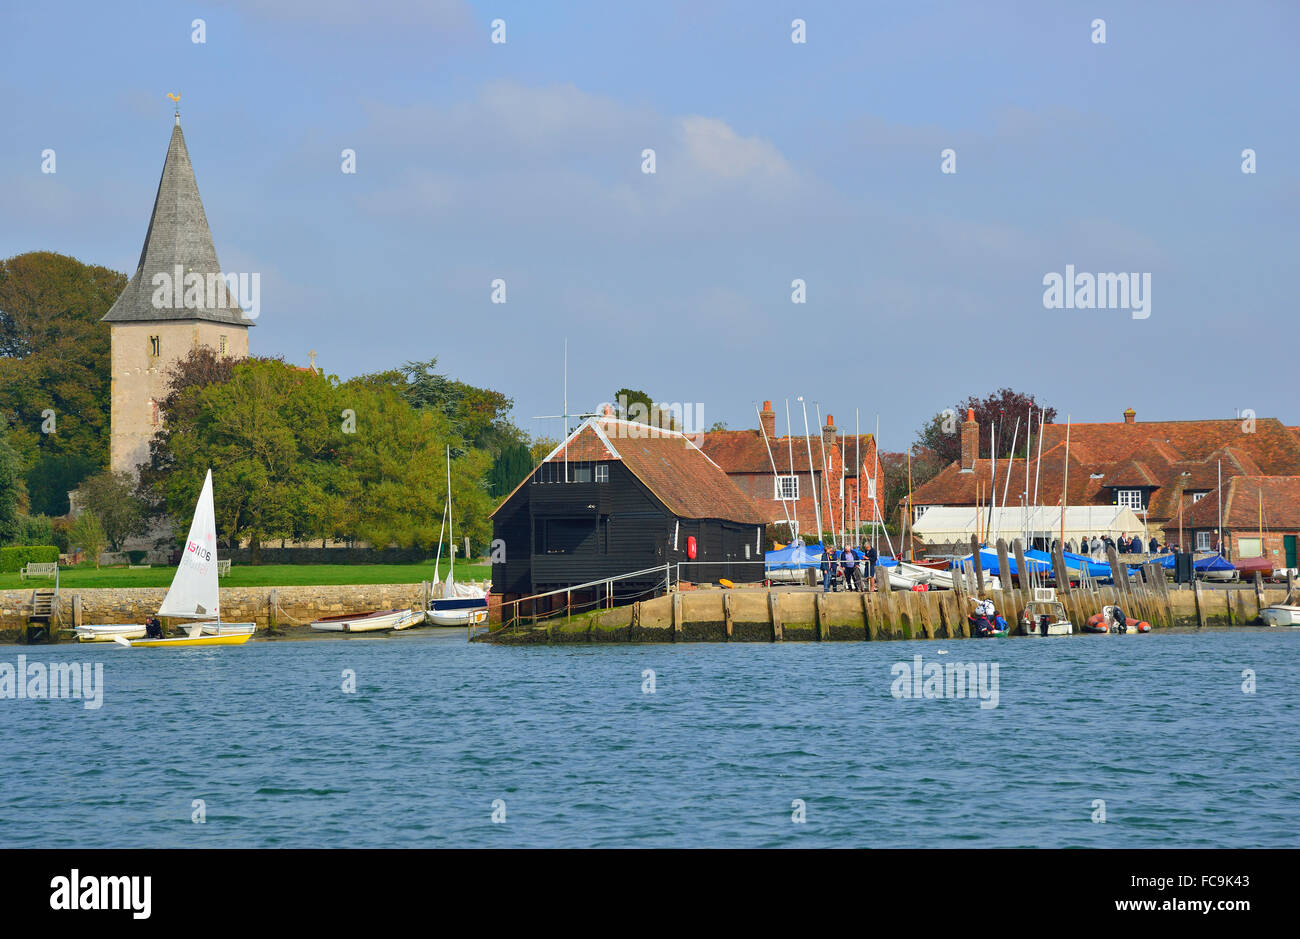 View taken from the water at high tide  of the village of Bosham situated in Chichester Harbour, West Sussex, England (UK) Stock Photo